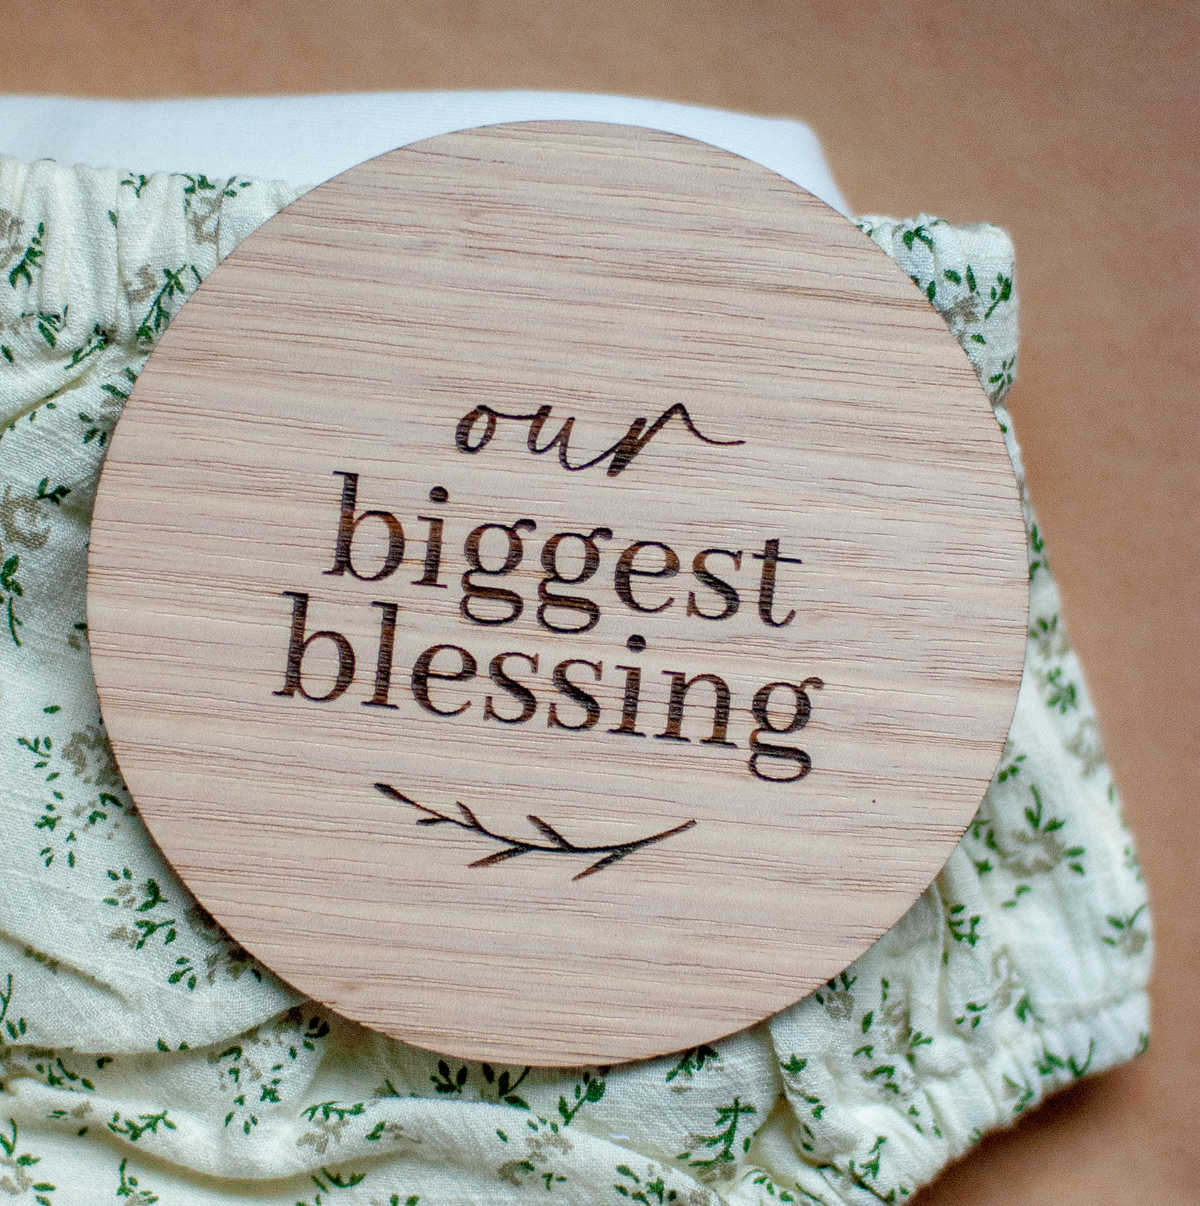 CHristian bible inspired pregnancy or nursery timber disk for photos and annoucments